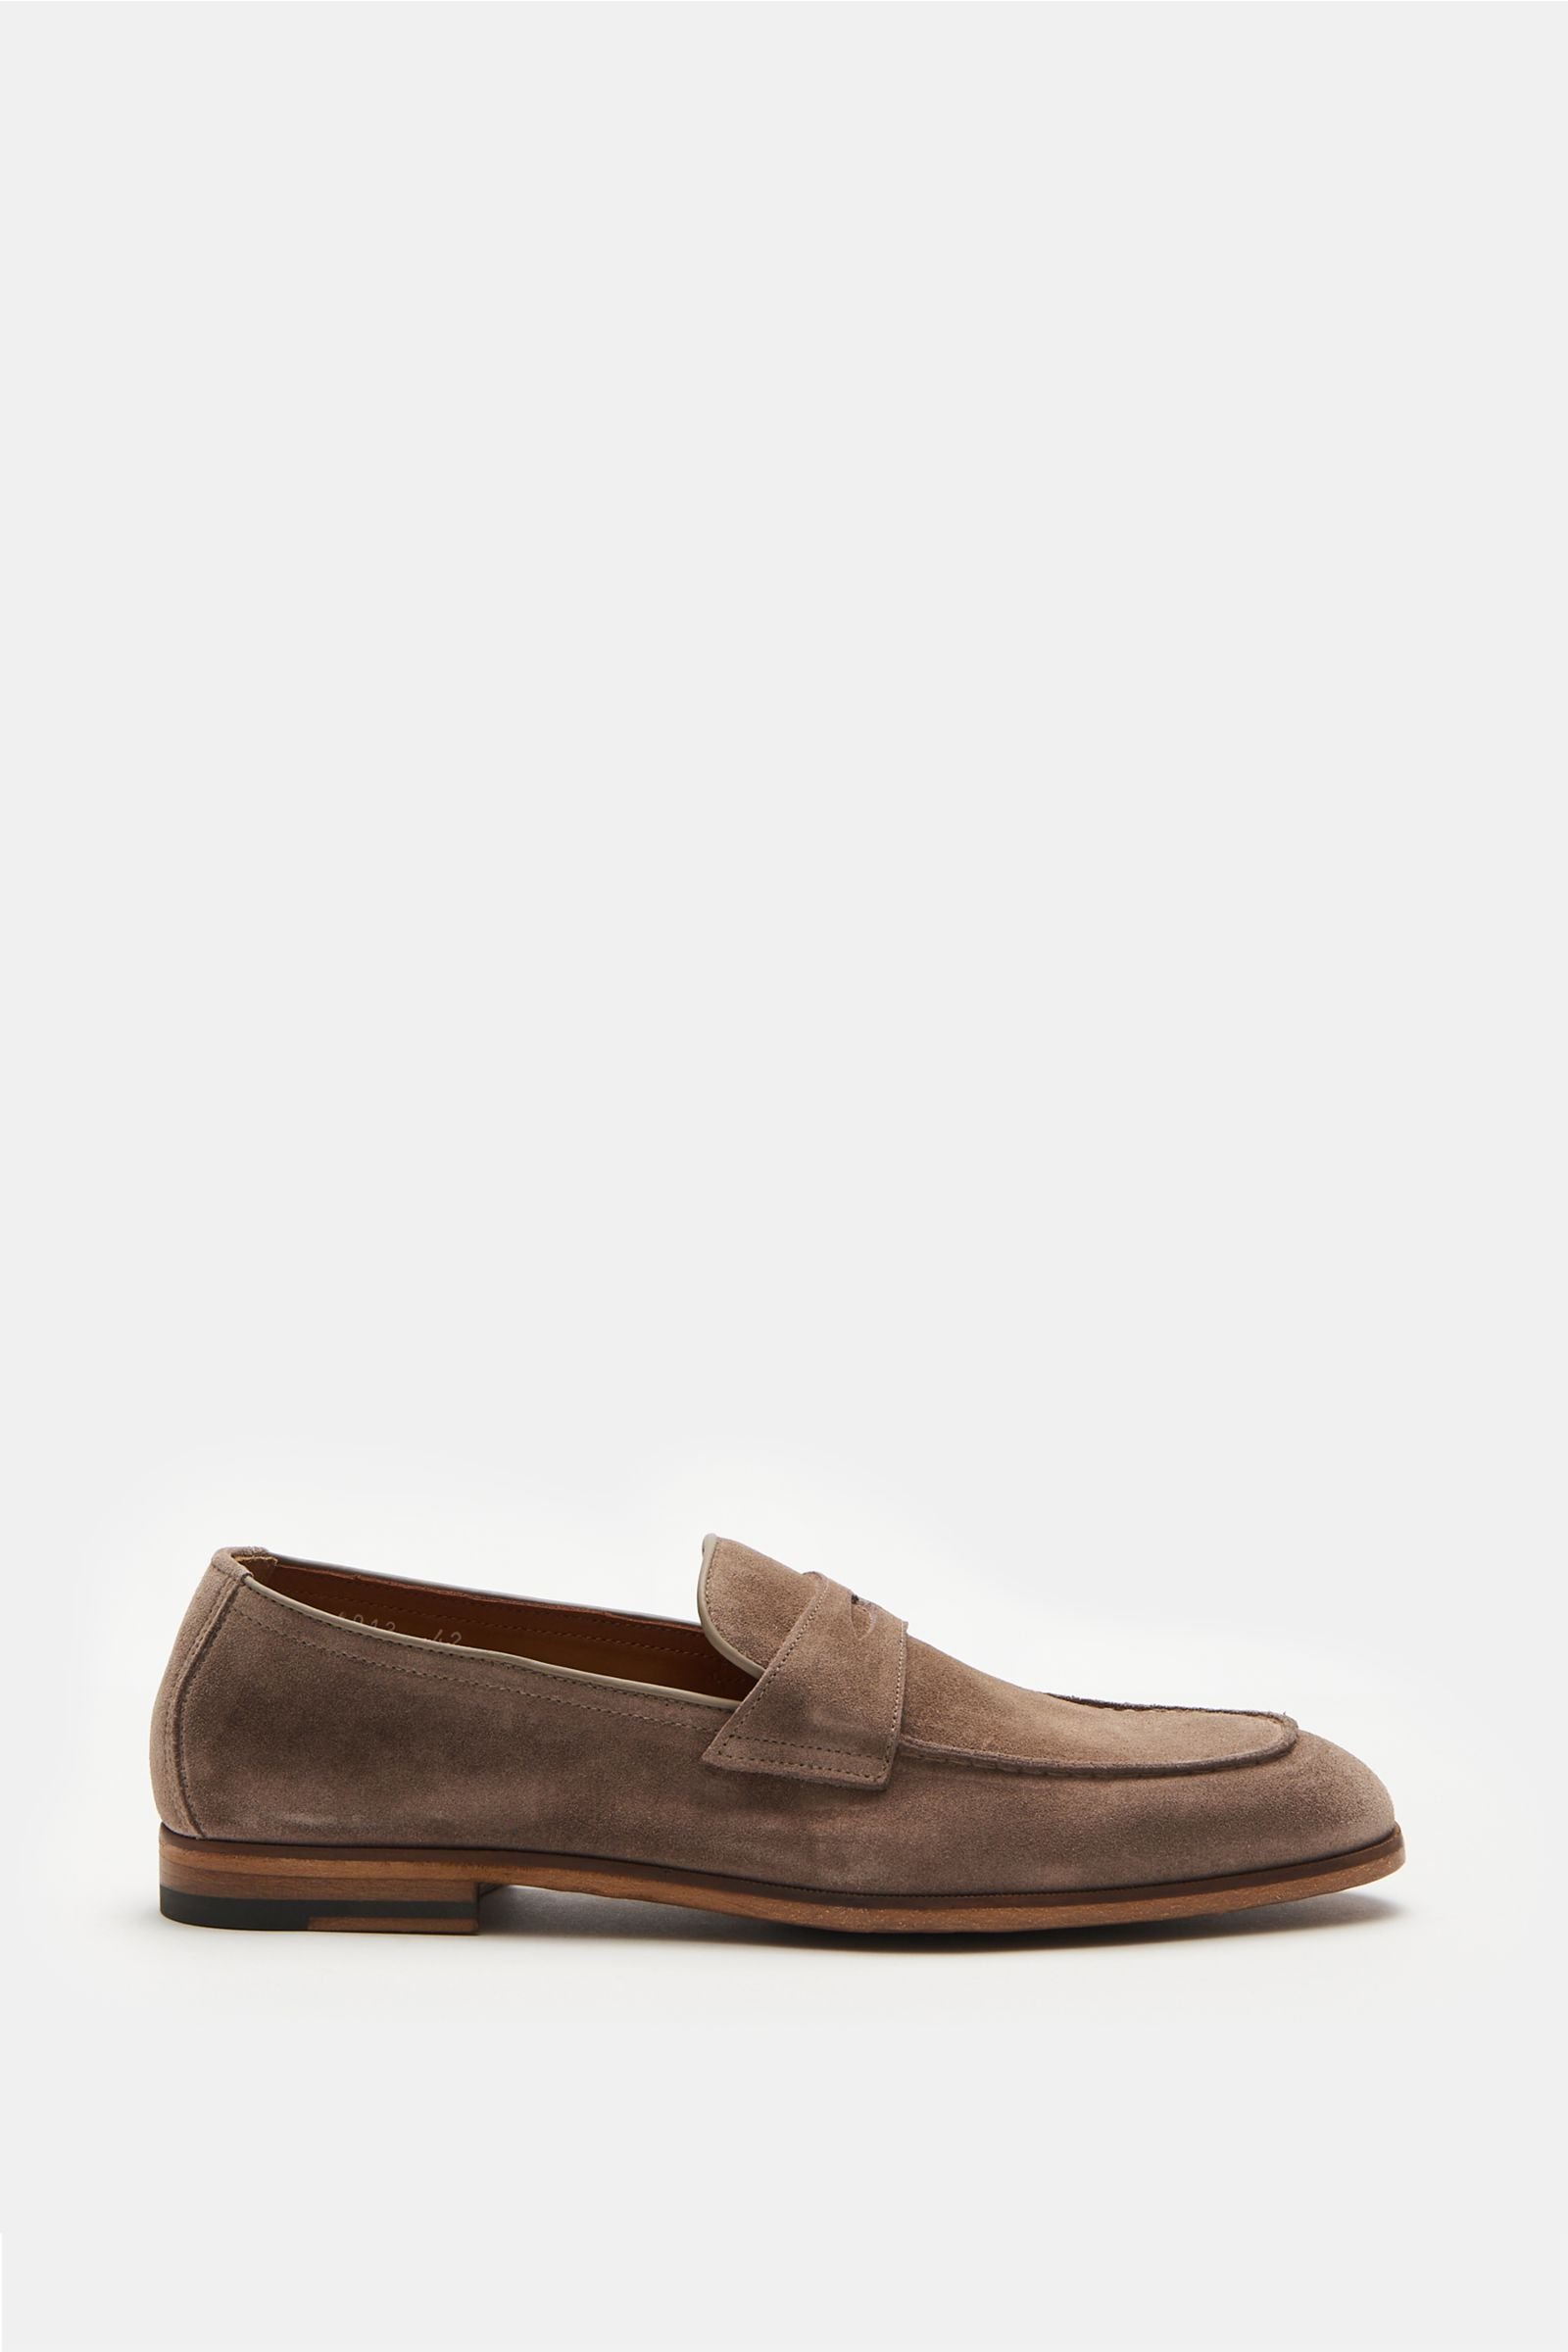 Penny loafers grey-brown